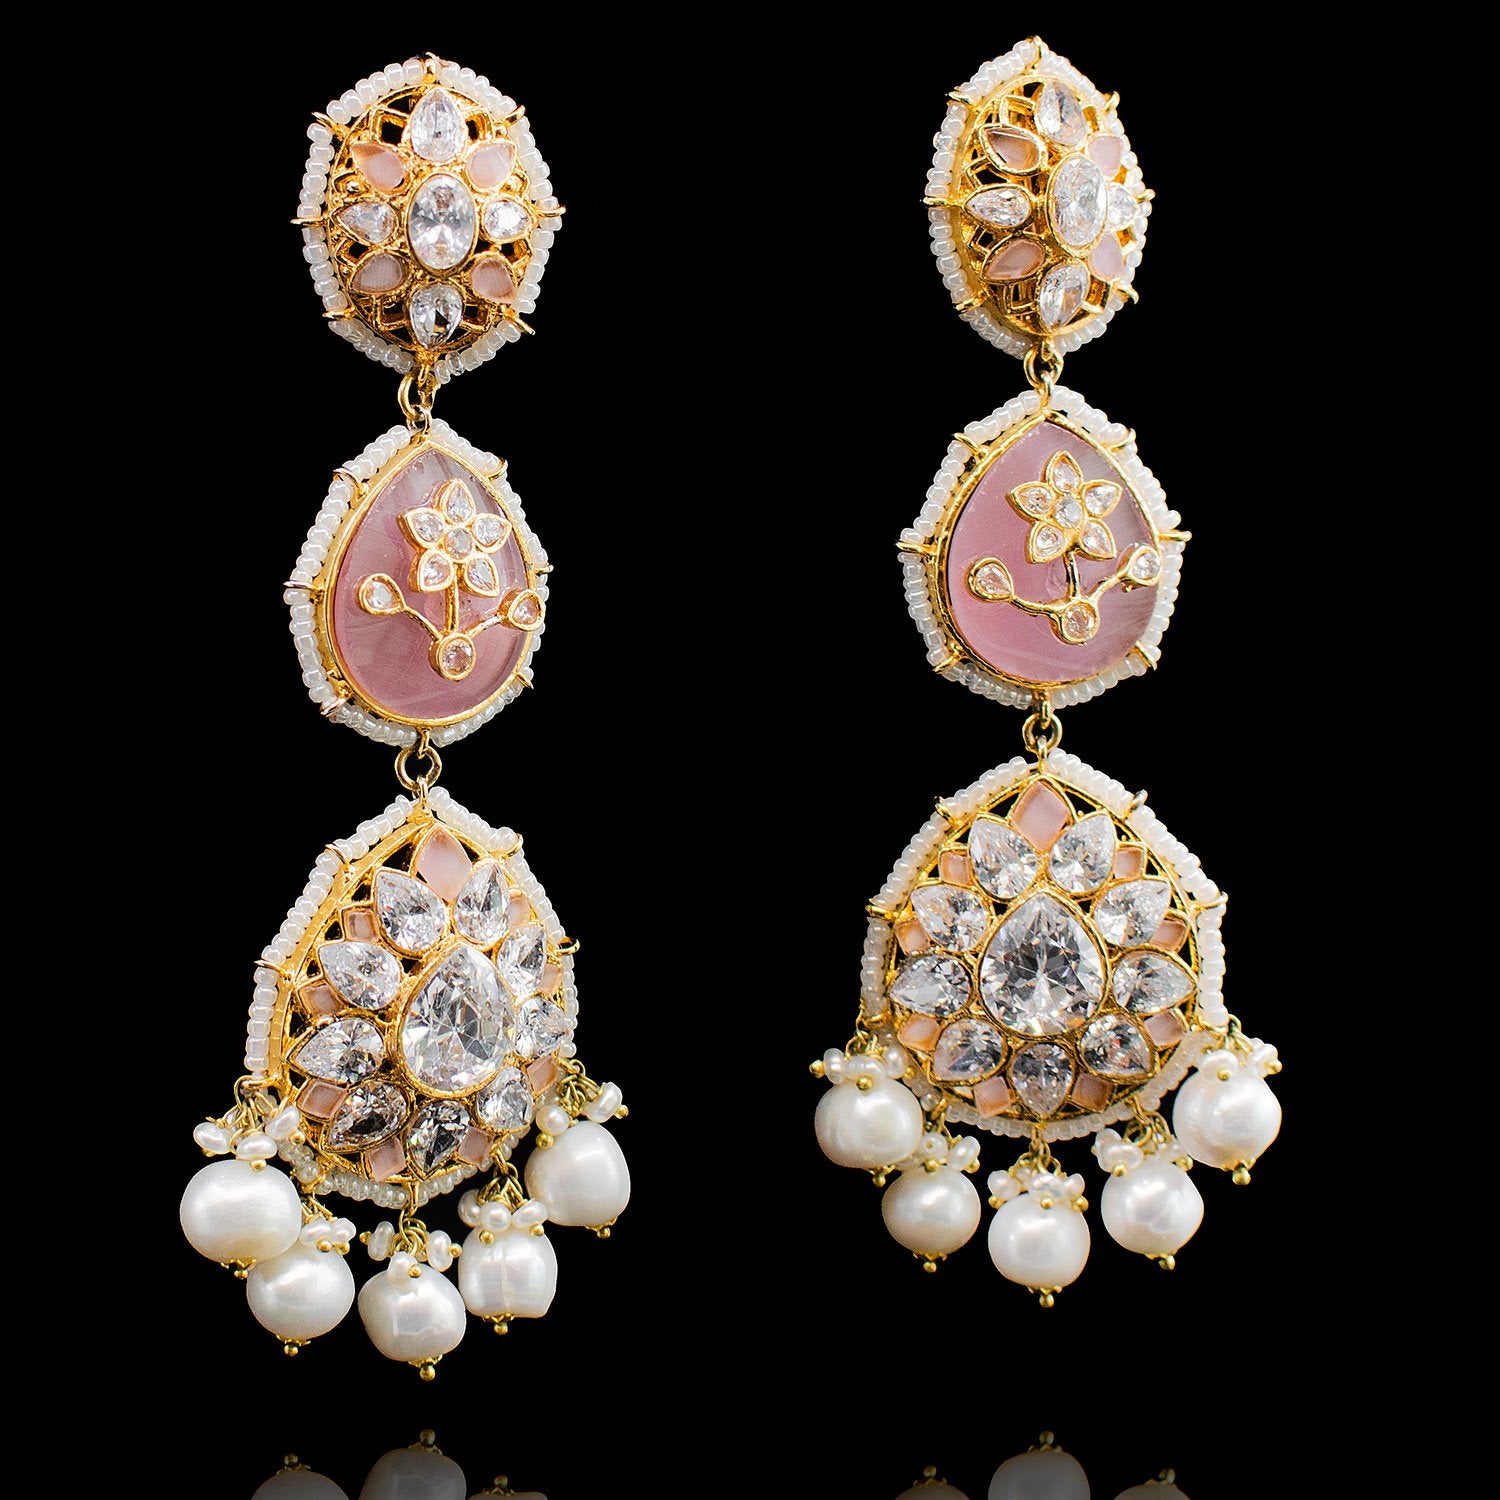 Malika Earrings - Available in 2 Options – á La Couture